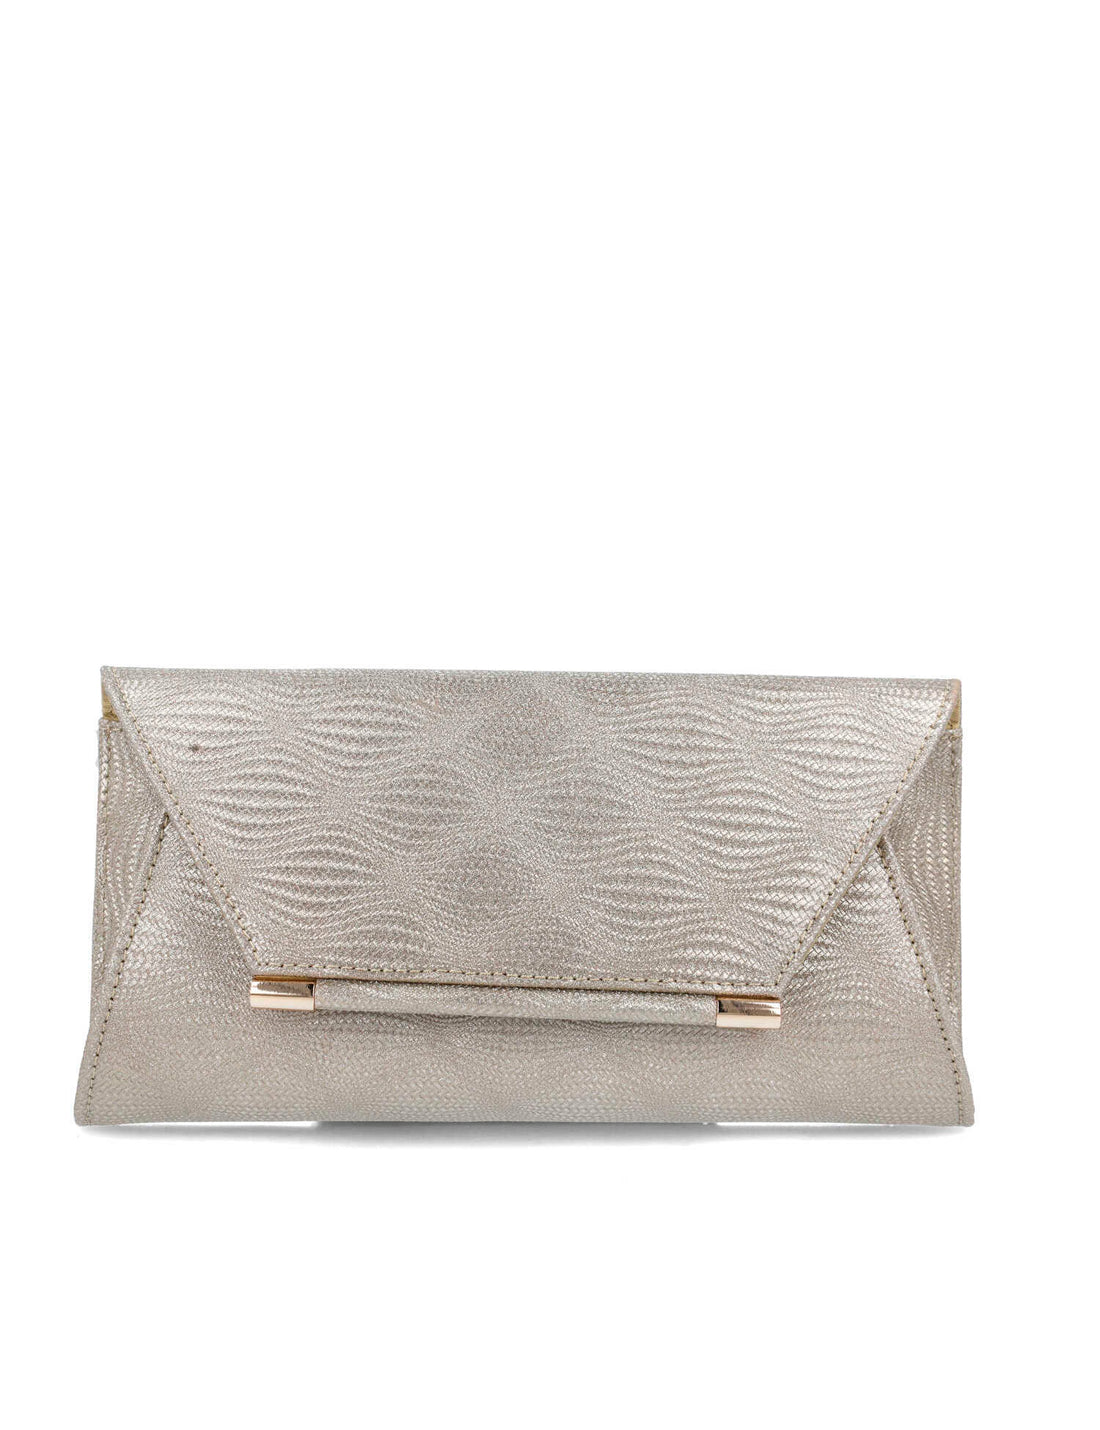 Beige Clutch With Gold Hardware_85642_00_01